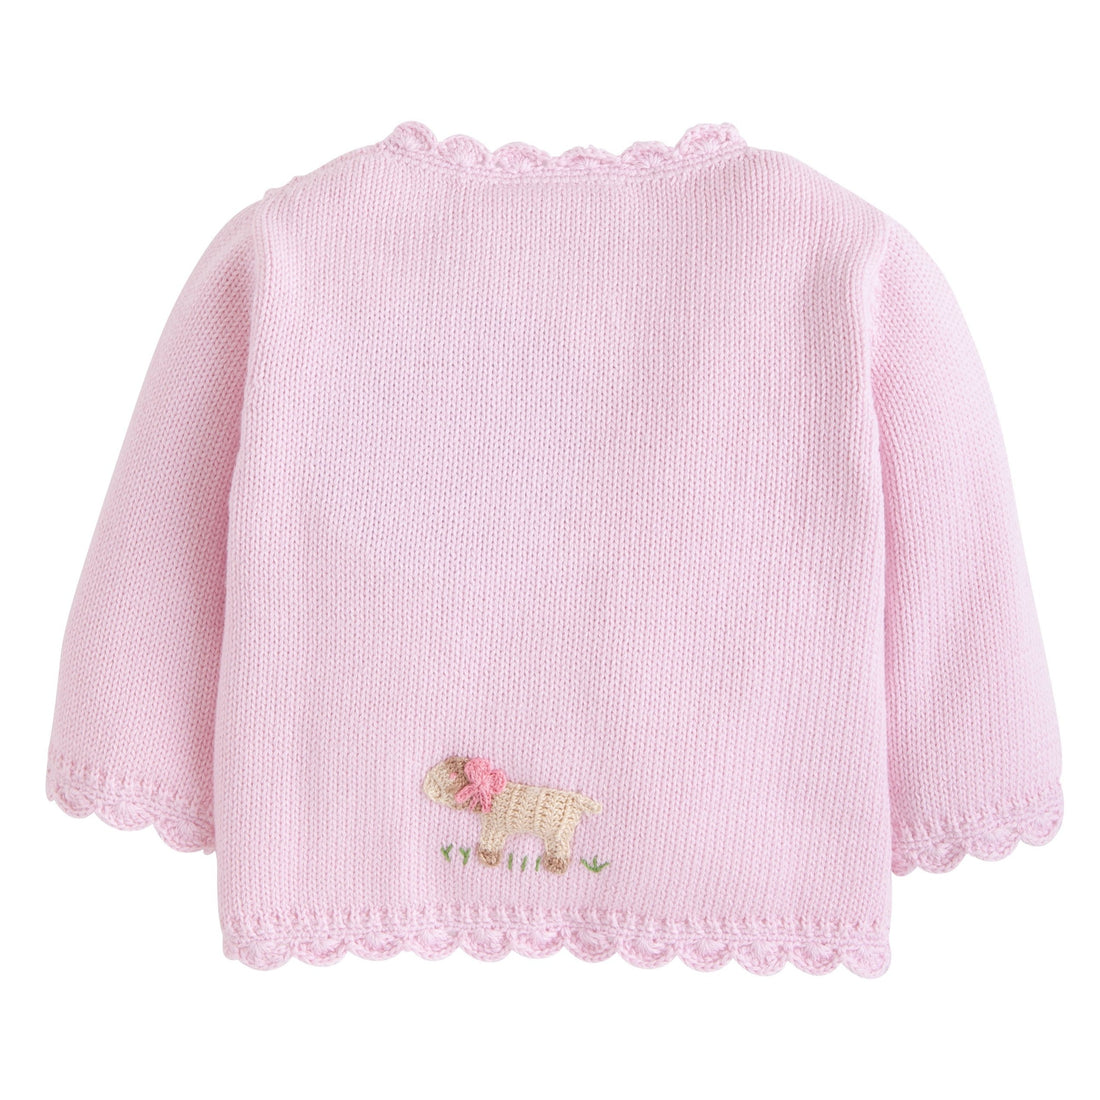 Little English signature crochet sweater for baby girl, traditional pink sheep crochet sweater for baby girl